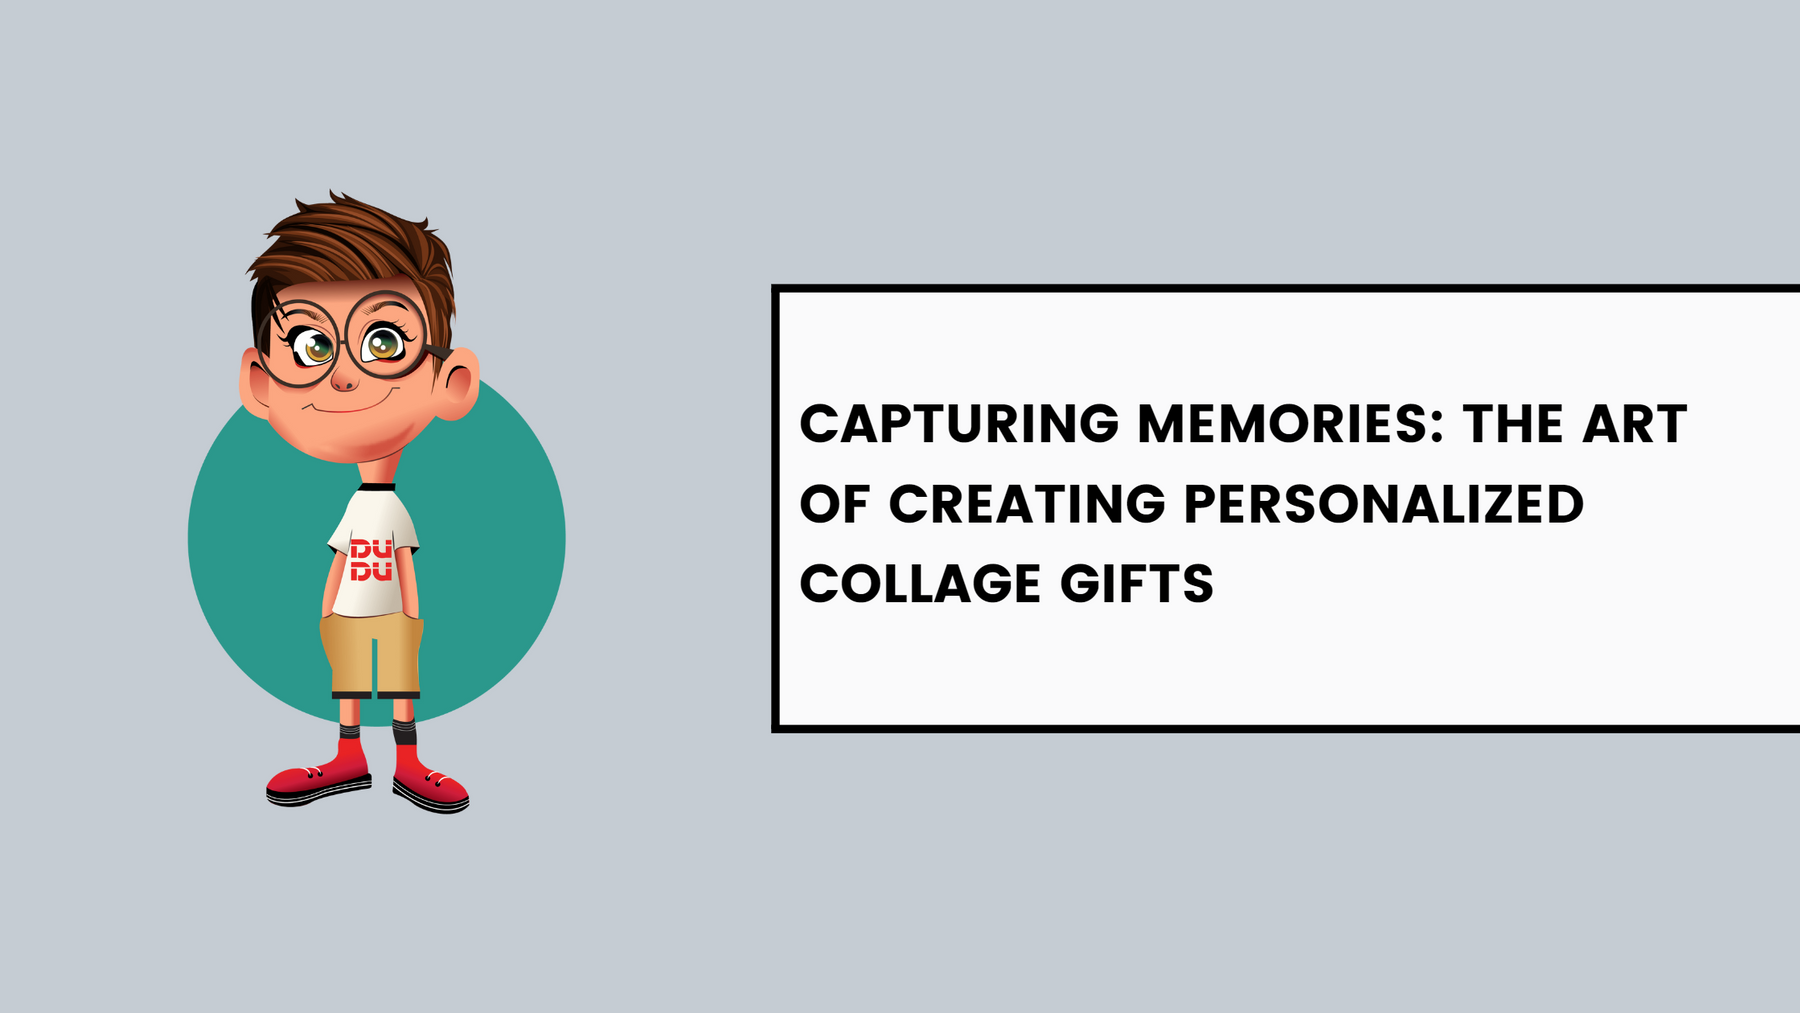 Capturing Memories: The Art of Creating Personalized Collage Gifts